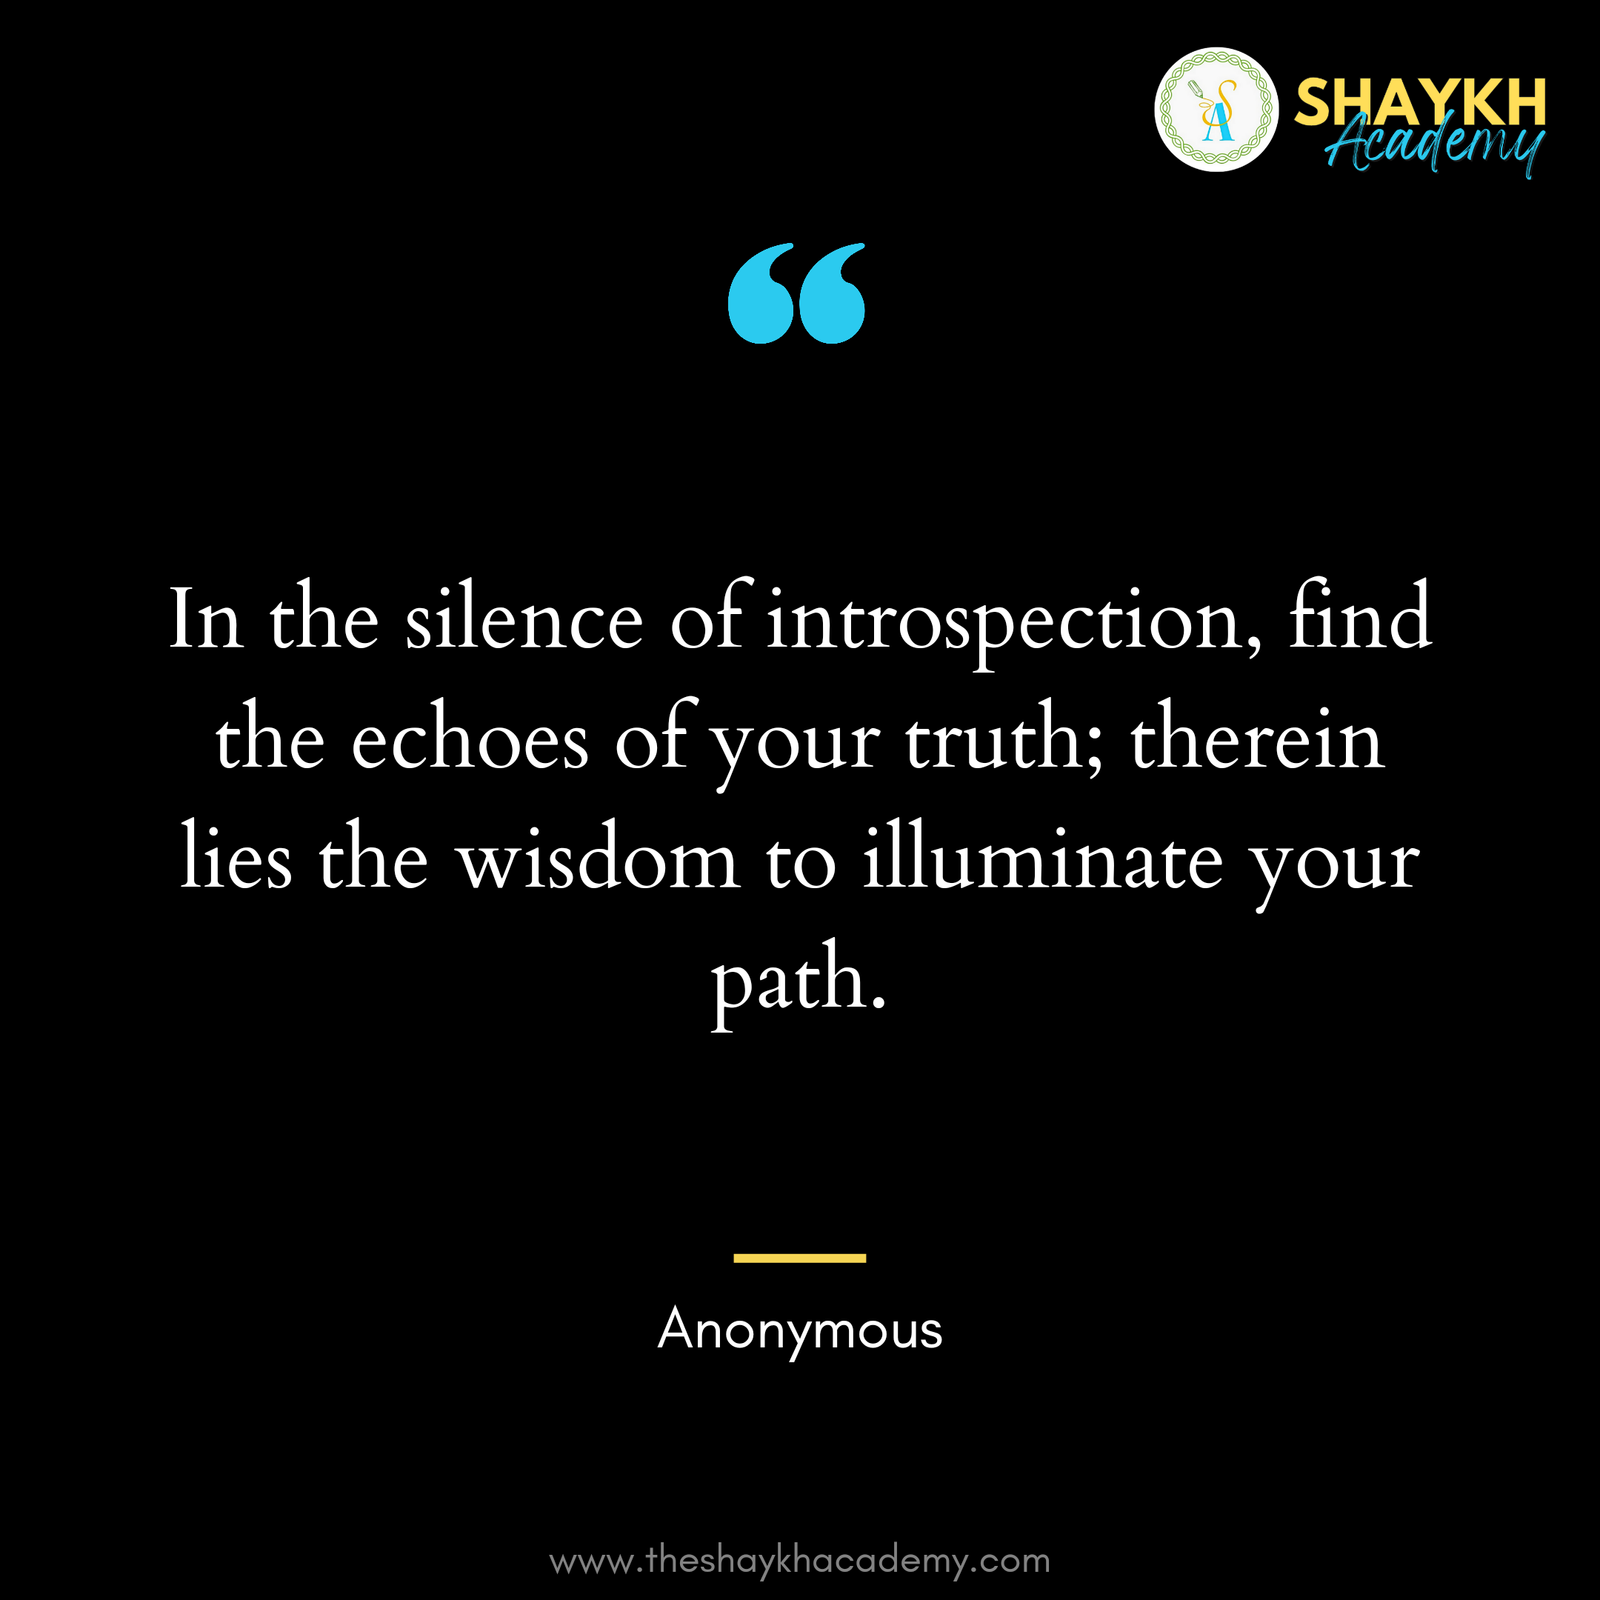 In the silence of introspection, find the echoes of your truth; therein lies the wisdom to illuminate your path.